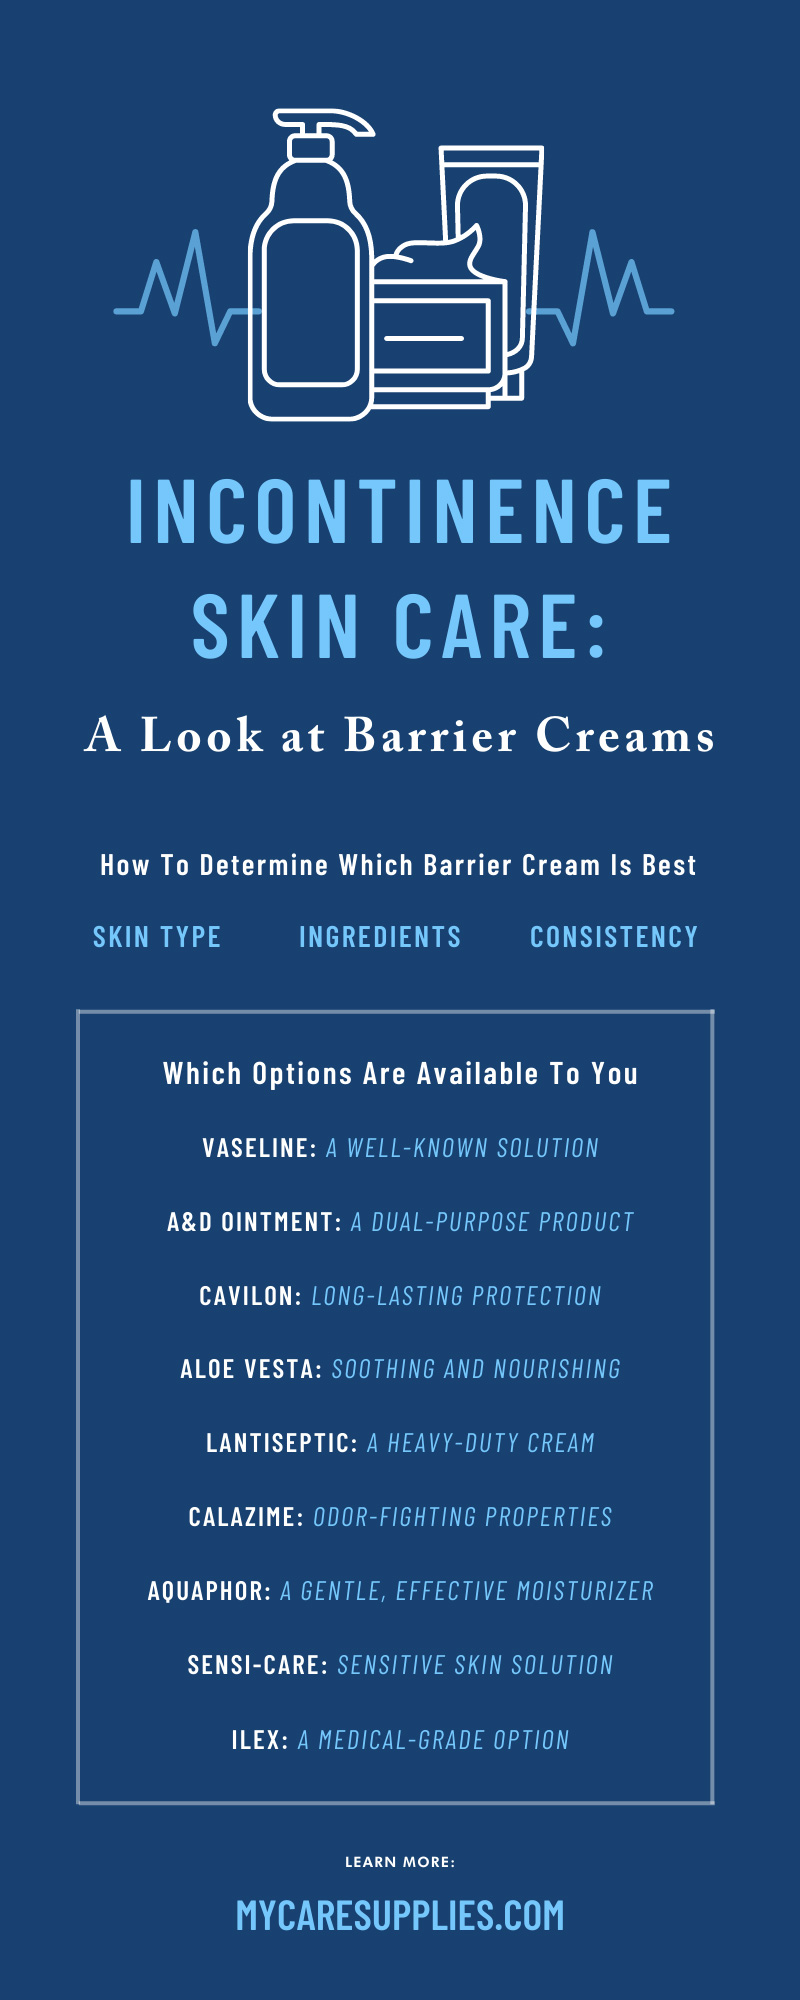 Incontinence Skin Care: A Look at Barrier Creams